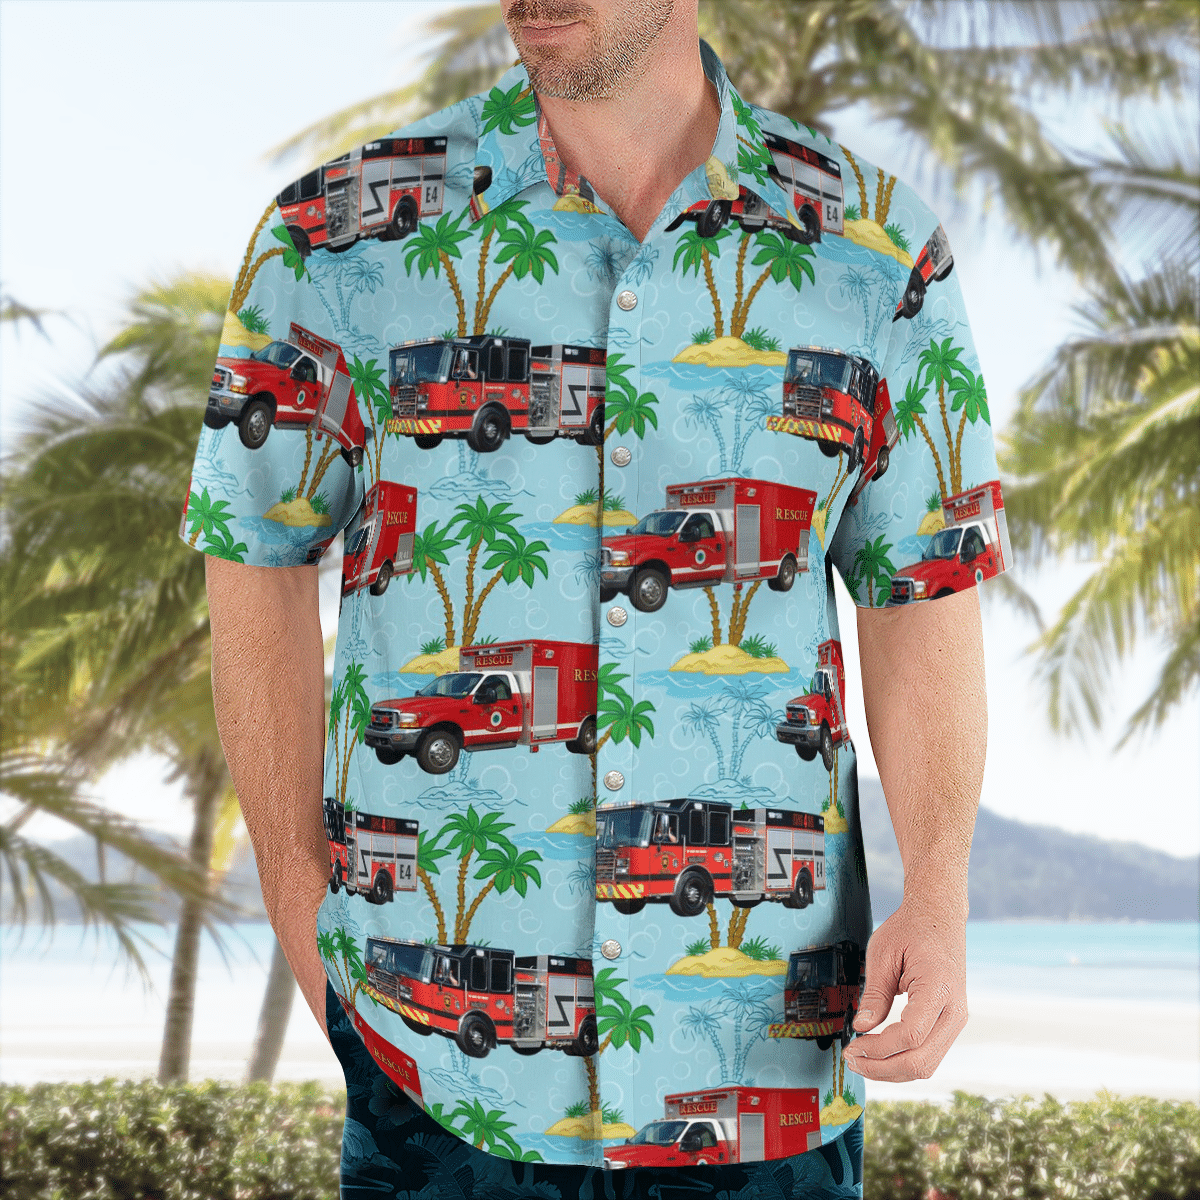 There are several styles of beach and Hawaiian shorts and tops to choose from 146